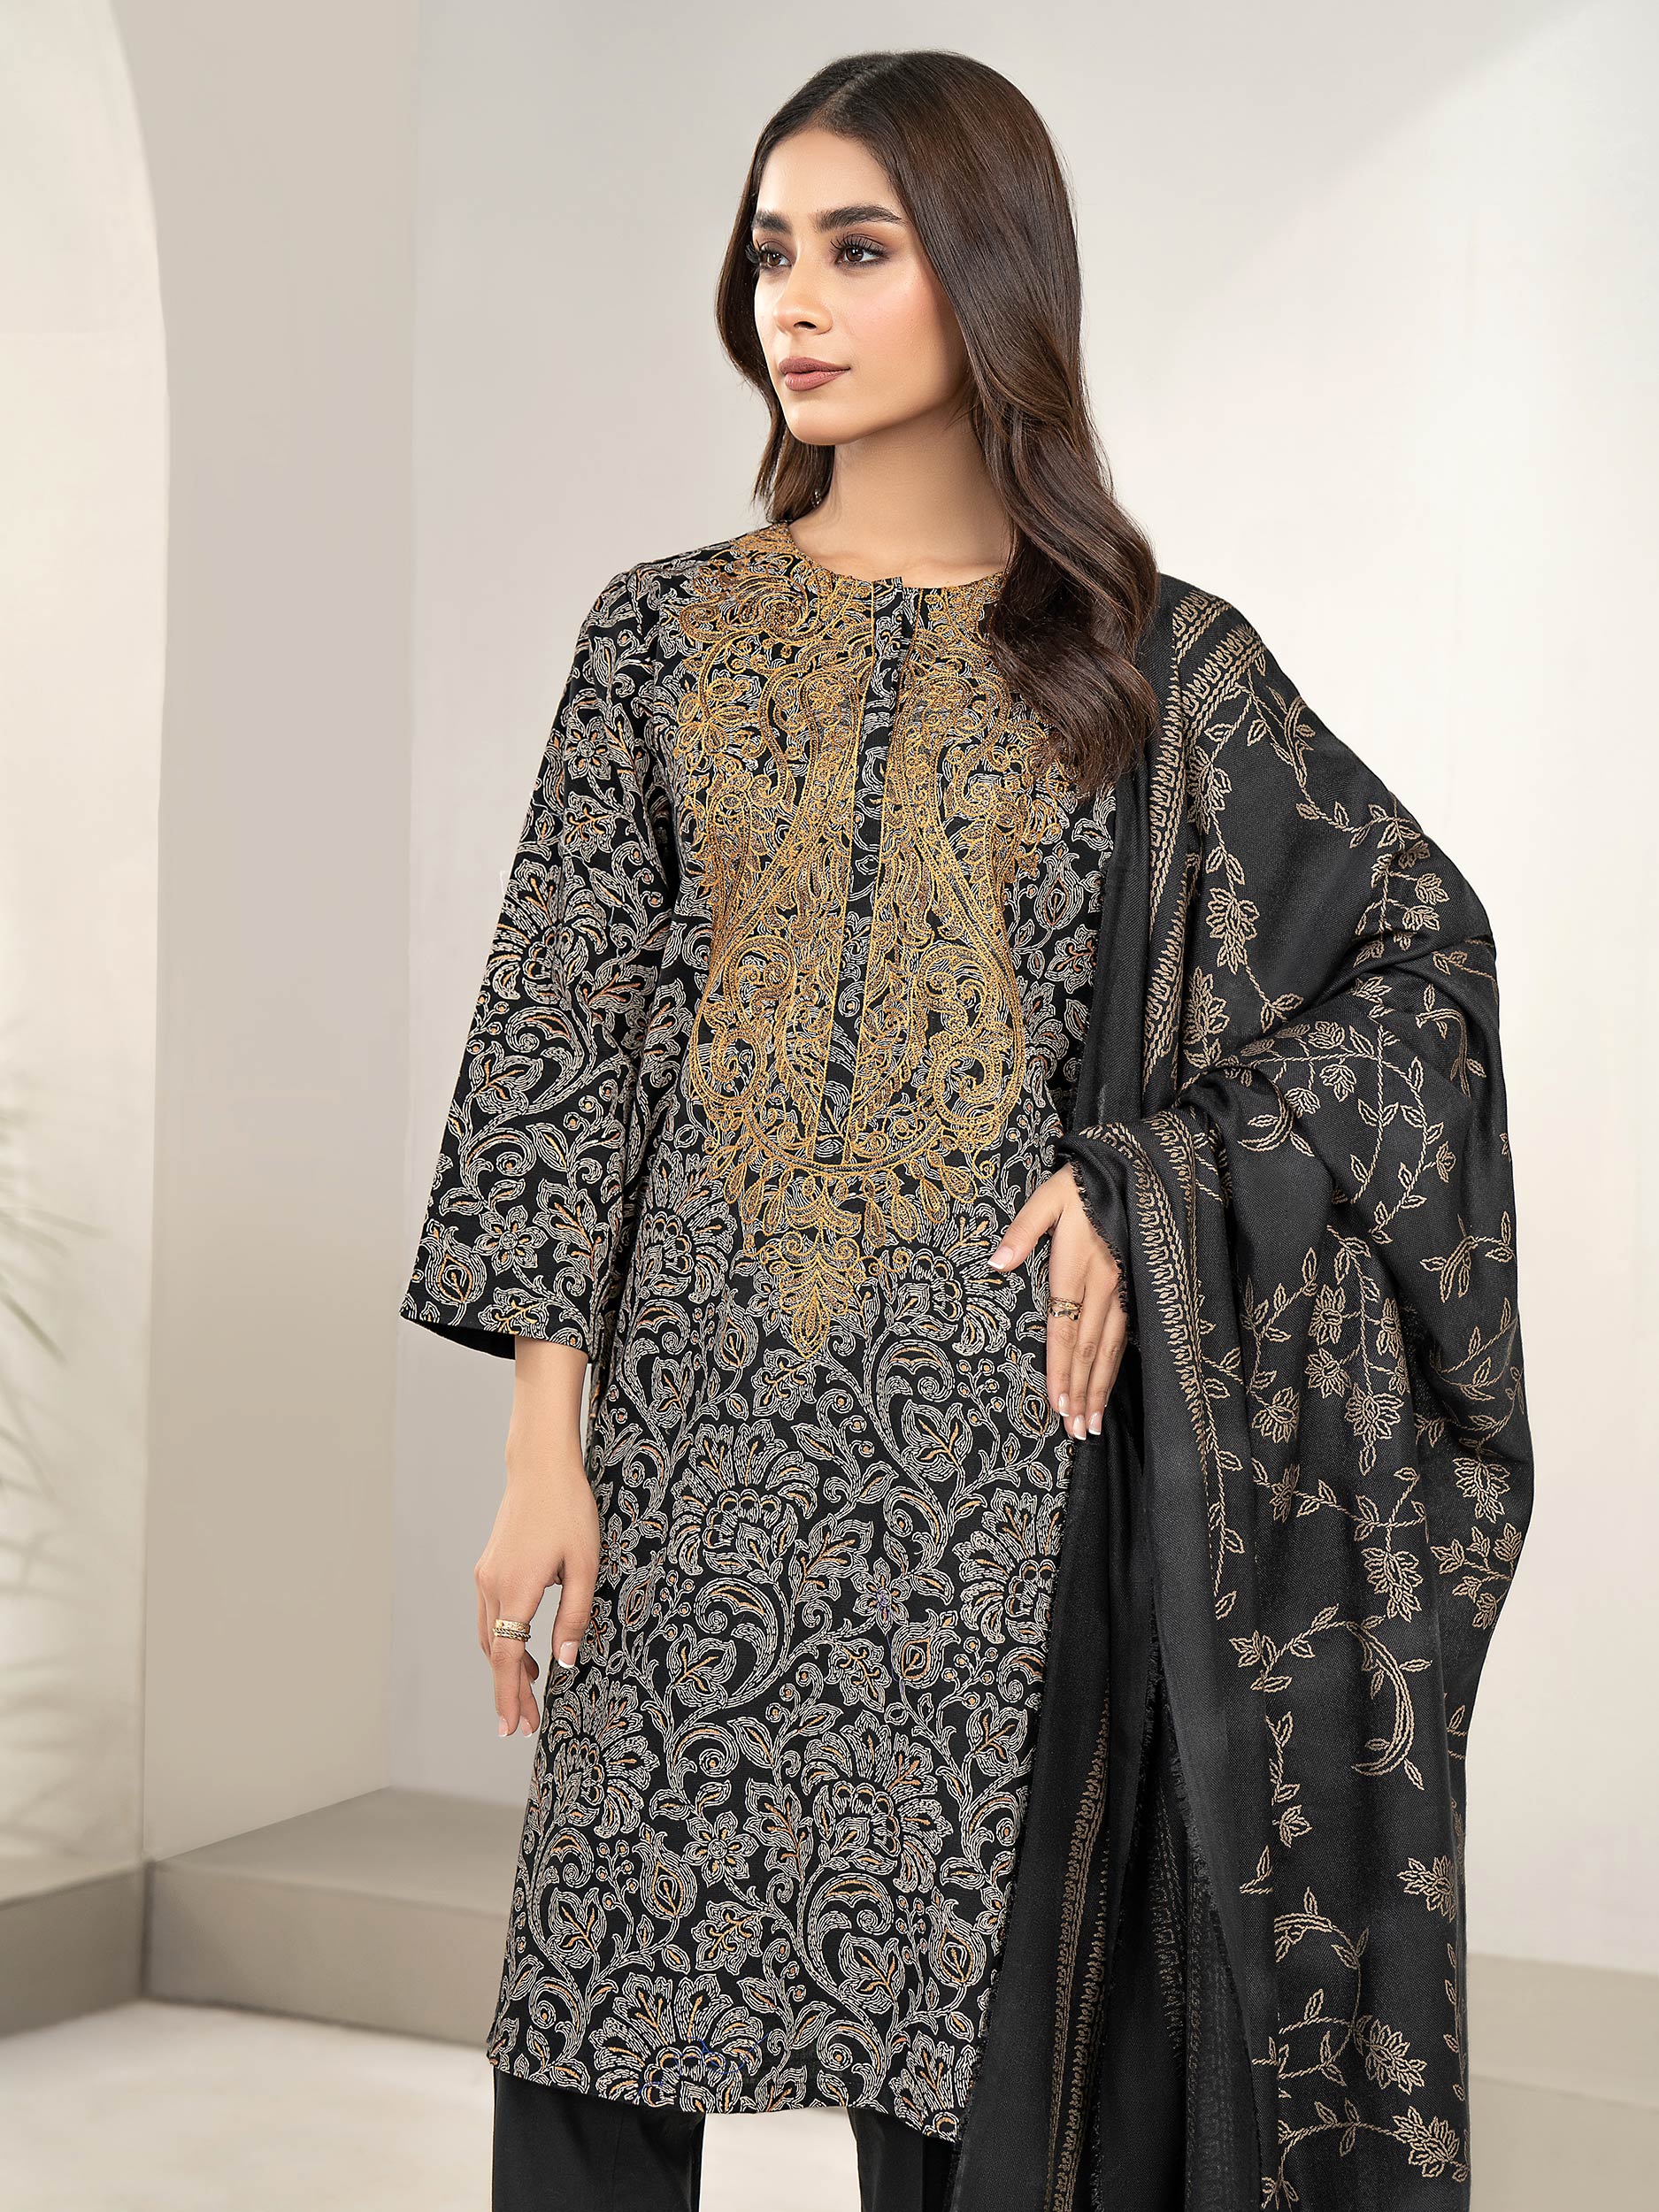 3 Piece Khaddar Suit-Embroidered (Unstitched)